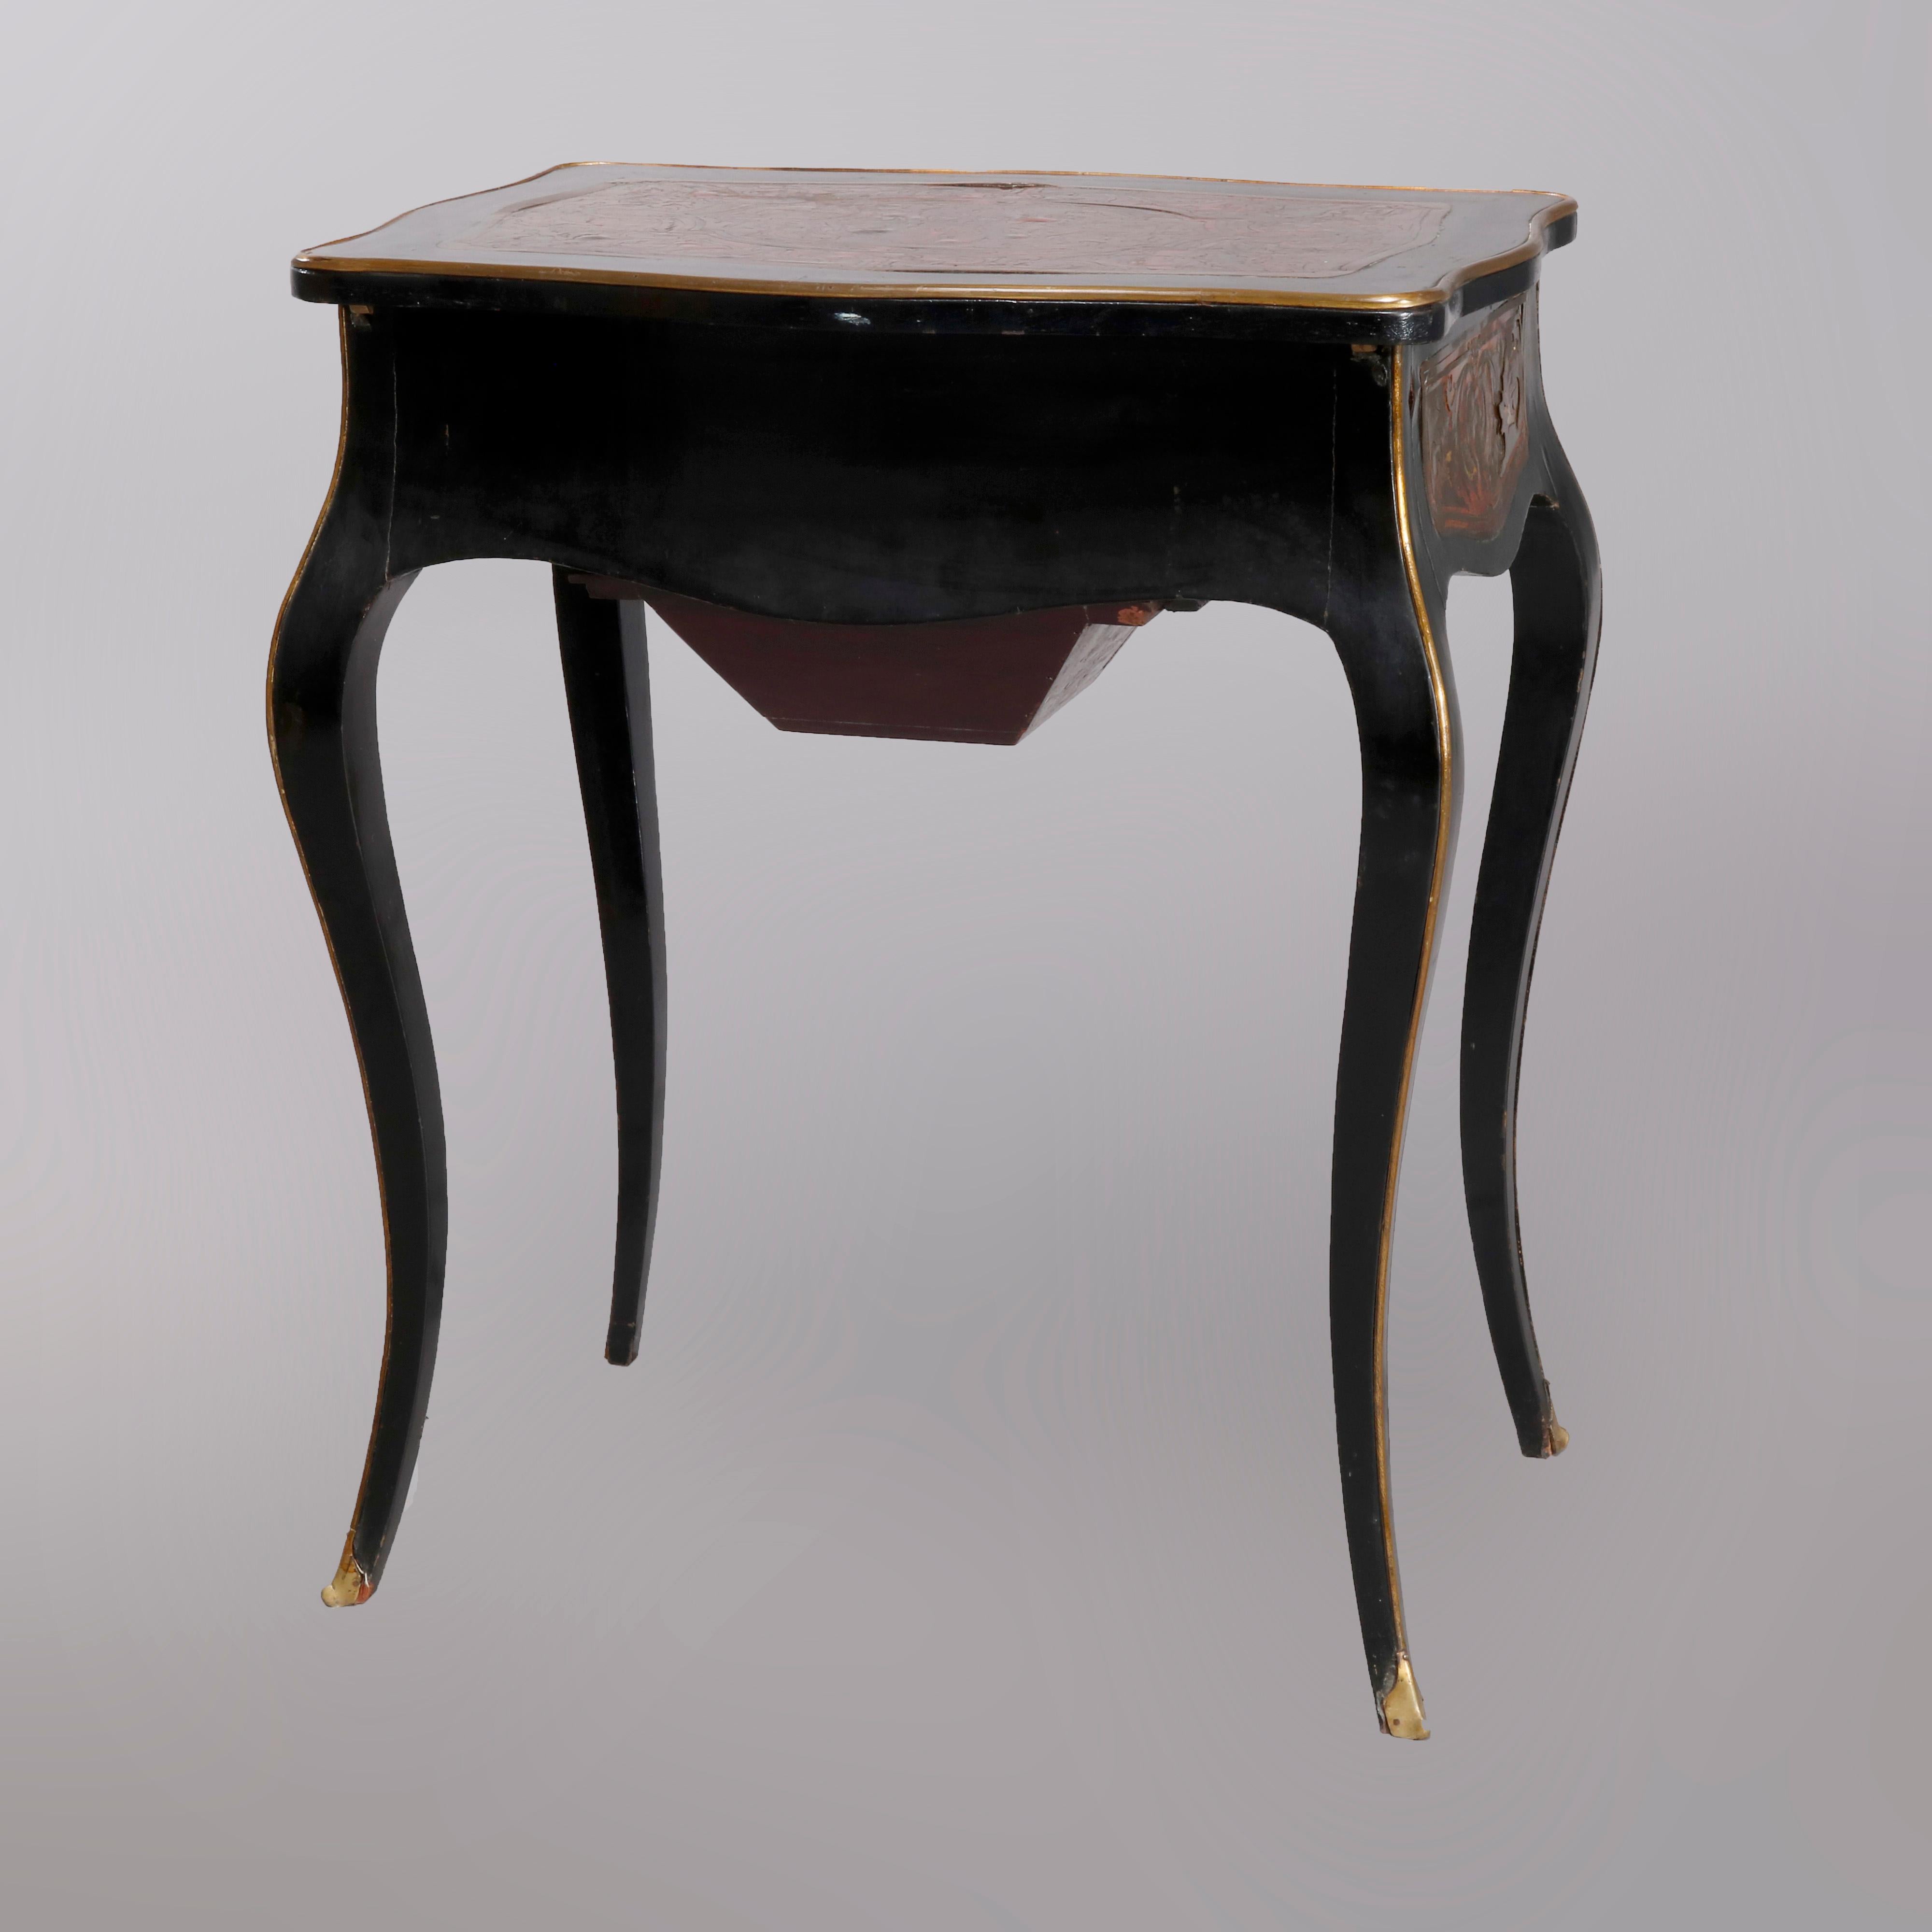 French Antique Napoleon III Boulle and Tortoise Shell Ebonized Sewing Stand, circa 1870